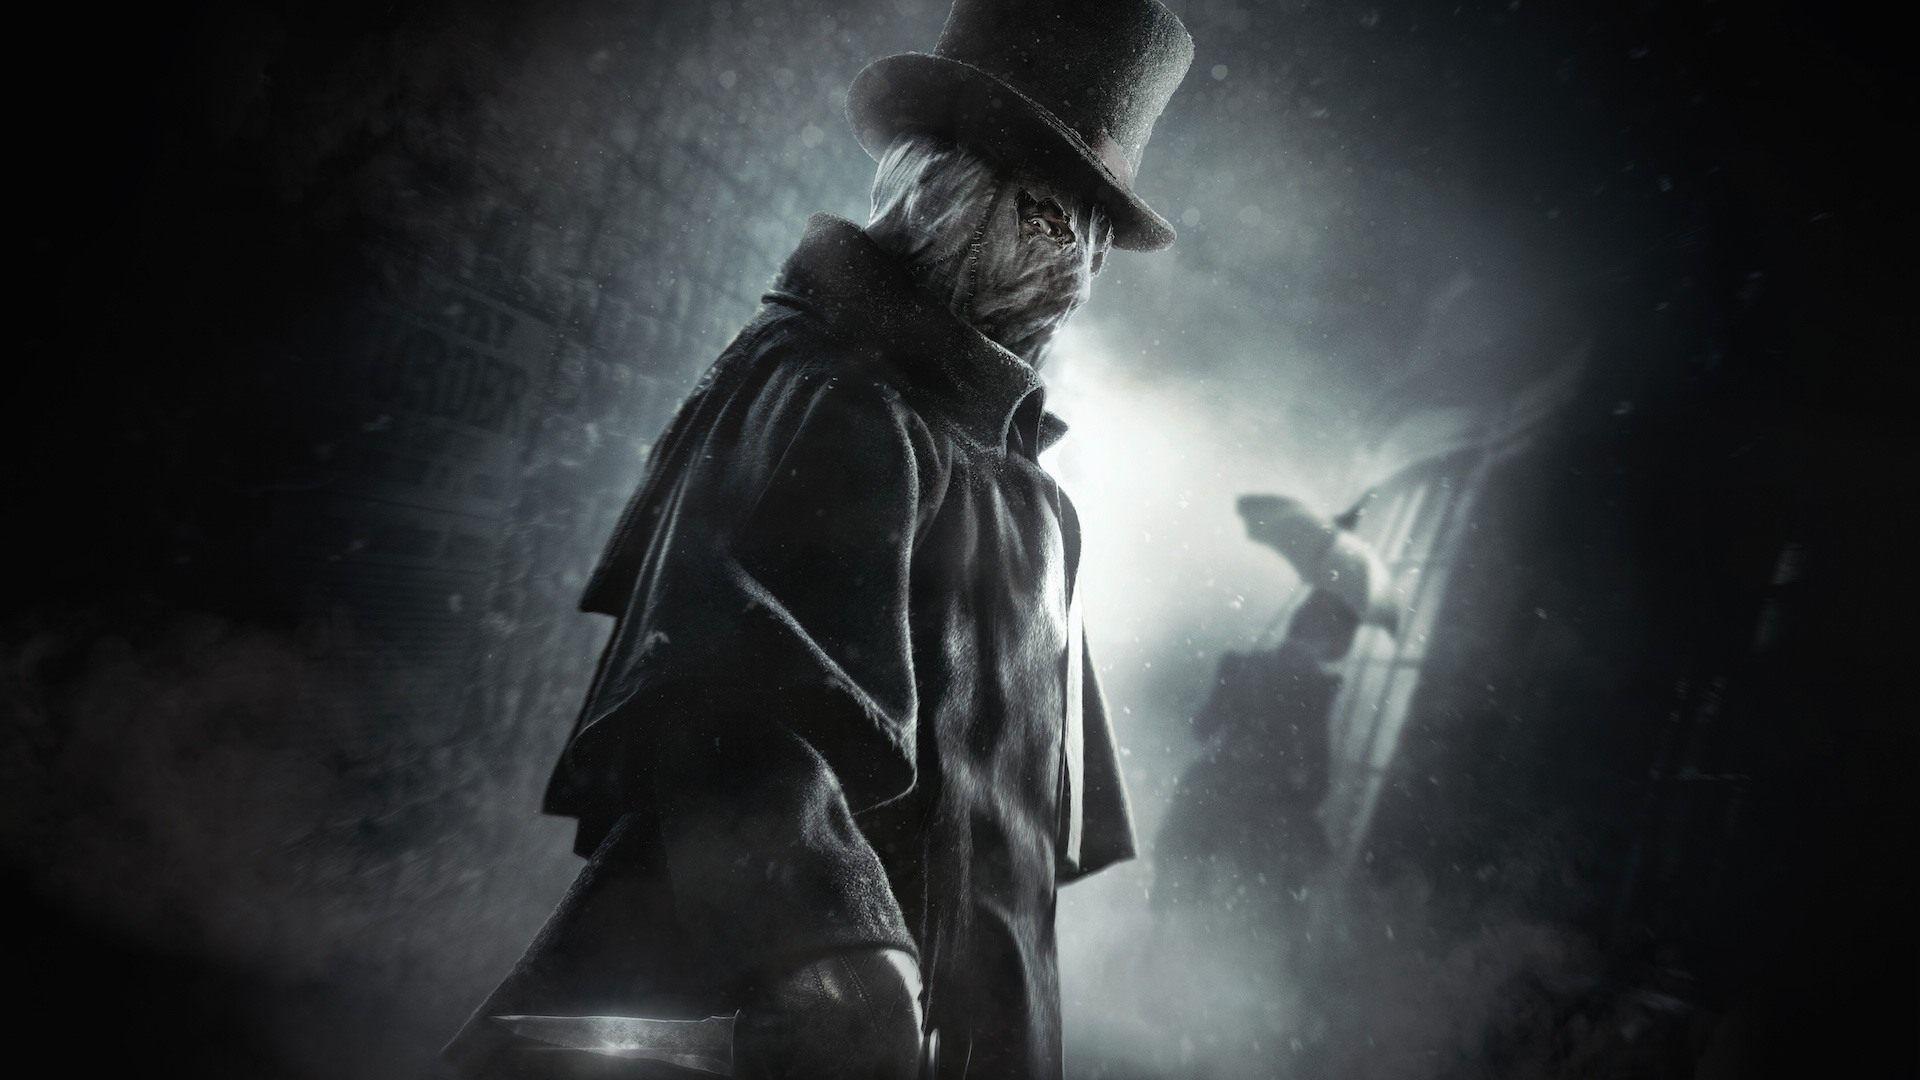 Assassins Creed Syndicate jack The Ripper HD Wallpaper 1920x1080